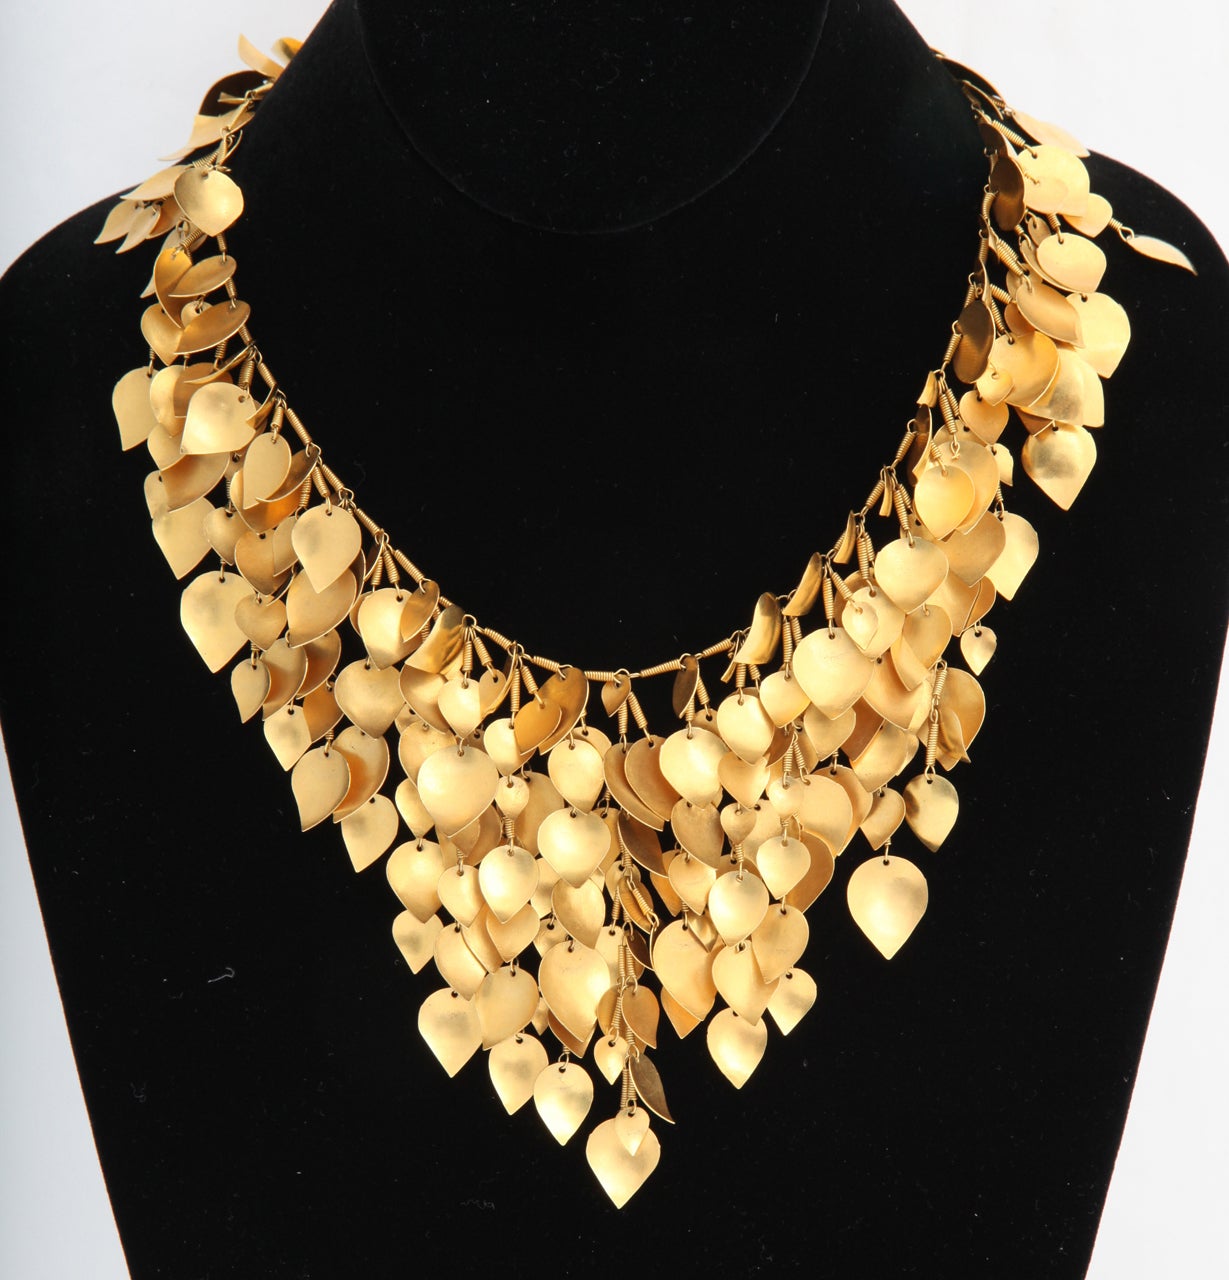 A 22kt yellow gold necklace composed of handmade 22kt yellow gold leaves and a handmade 18kt yellow gold chain.